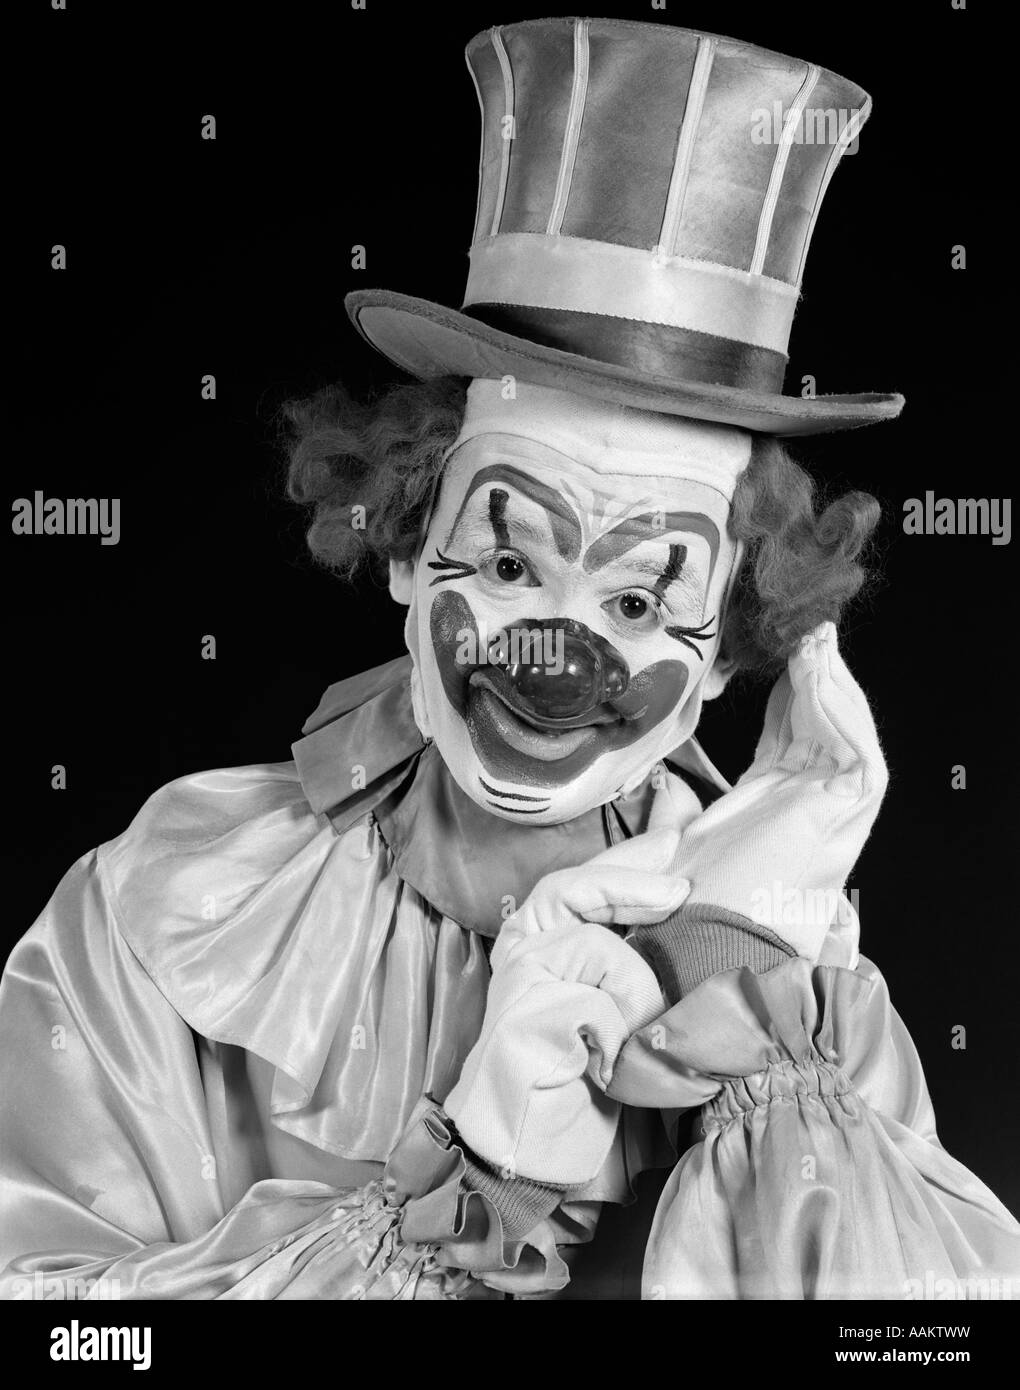 1950s PORTRAIT OF CLOWN WEARING TOP HAT SMILING LOOKING AT CAMERA Stock Photo